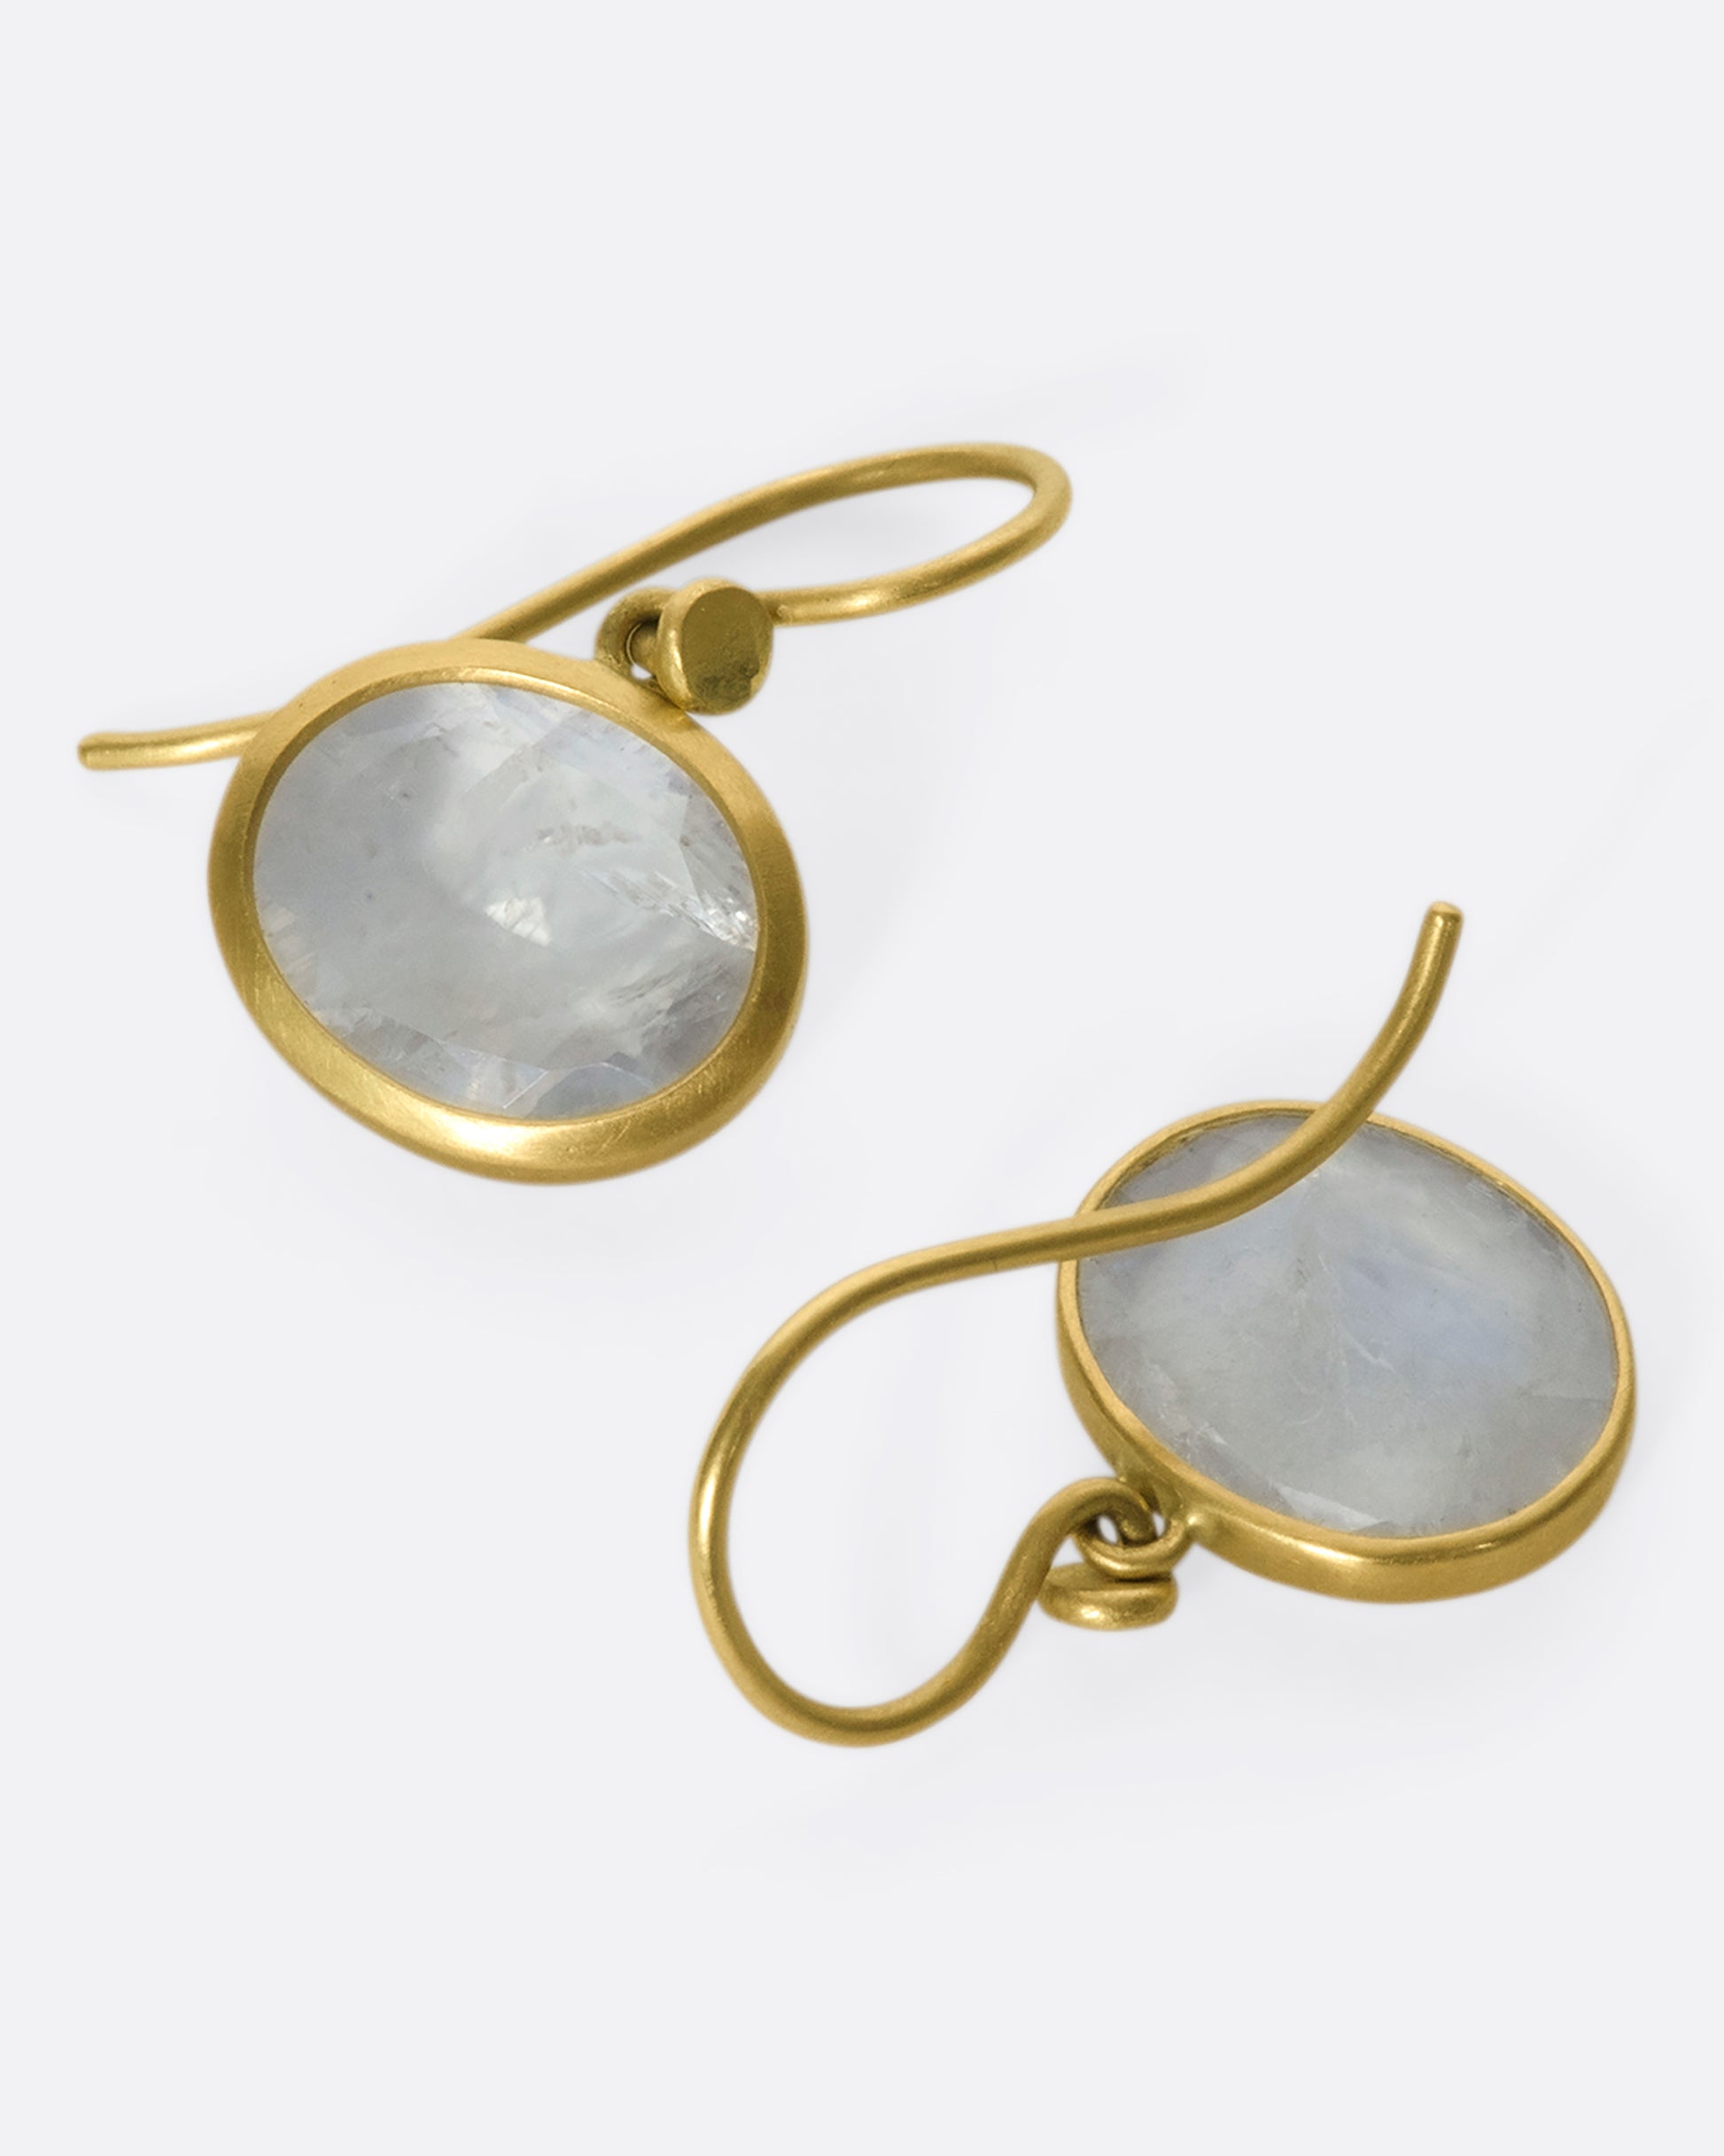 A pair of oval moonstone earrings set in yellow gold bezels, with one laying face up and one laying face down.